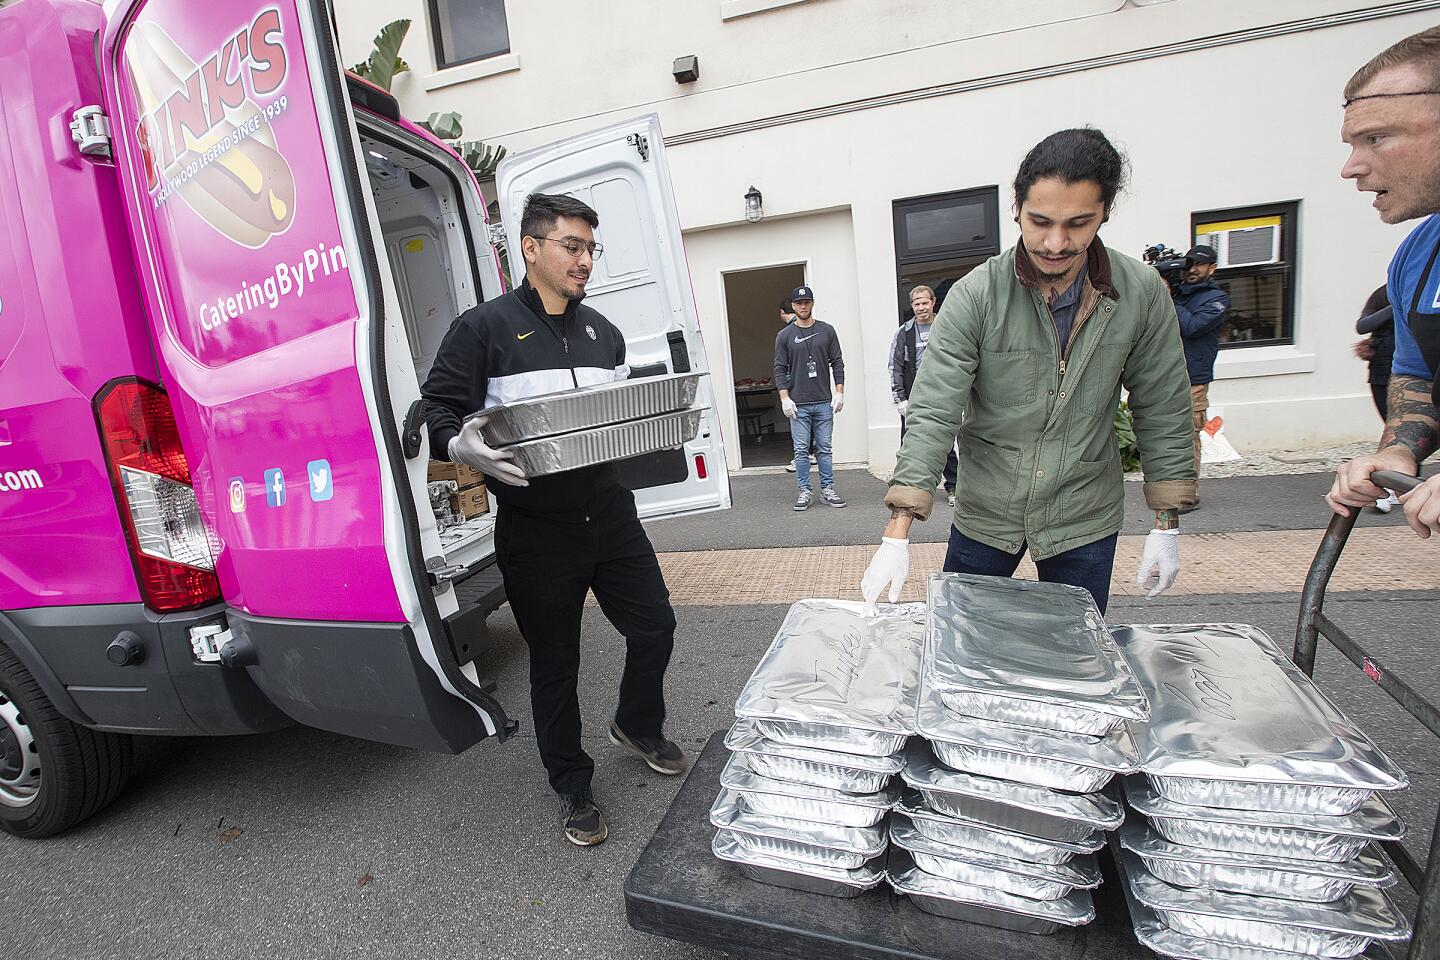 Pink's Hot Dogs workers deliver donated food to the Dream Center in L.A.